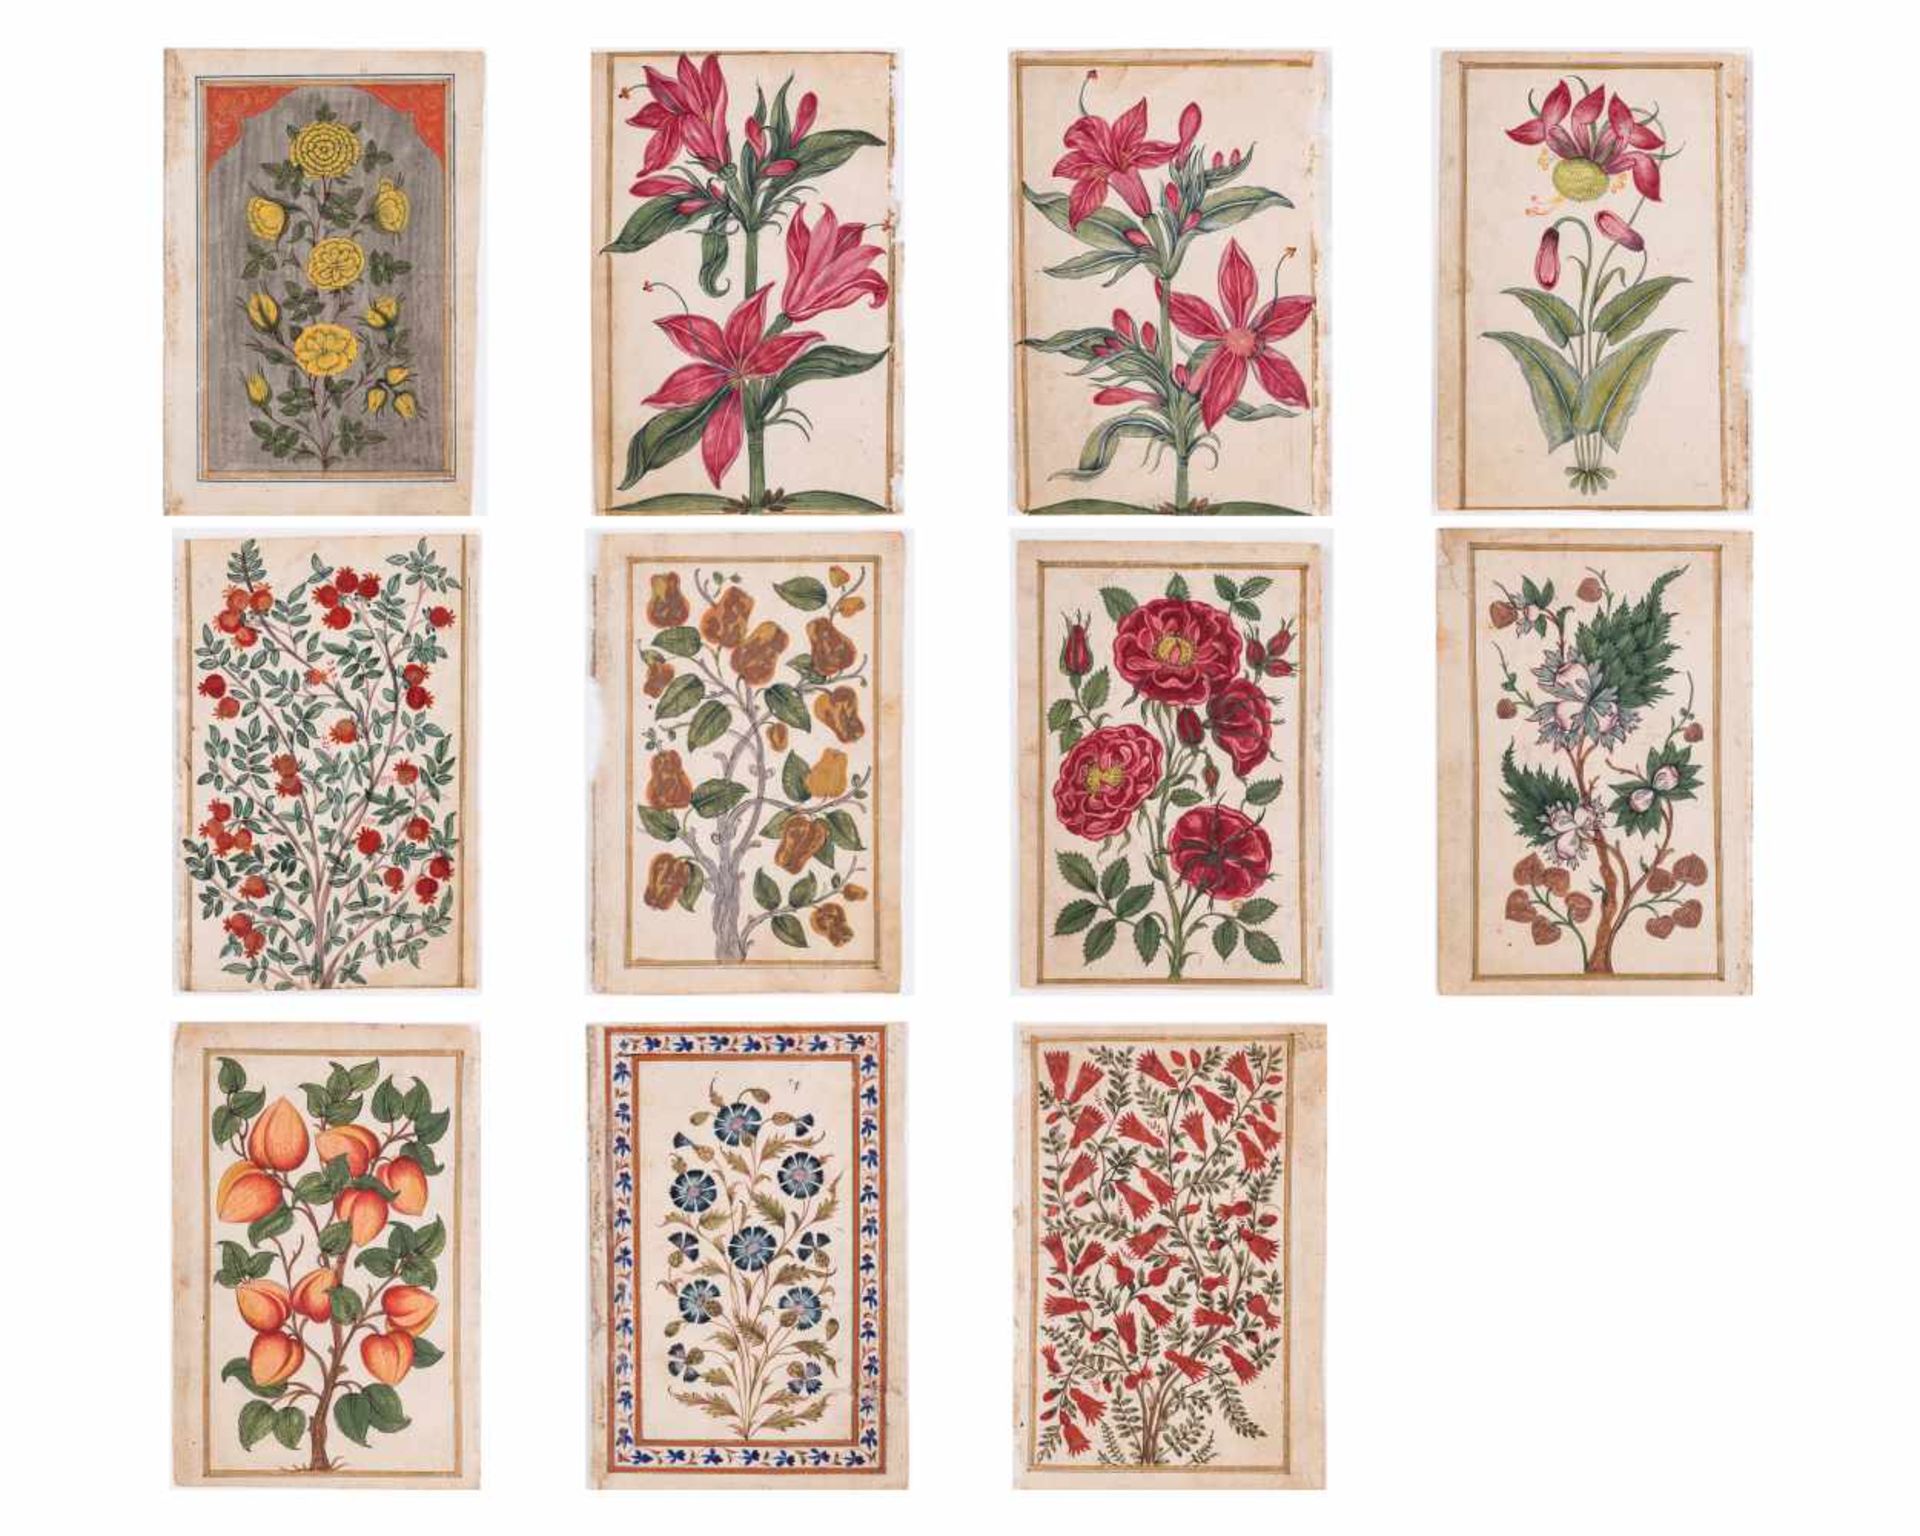 A GROUP OF ELEVEN FLOWER AND TREE MINIATURE PAINTINGS – INDIA 19th CENTURYWatercolors and gold paint